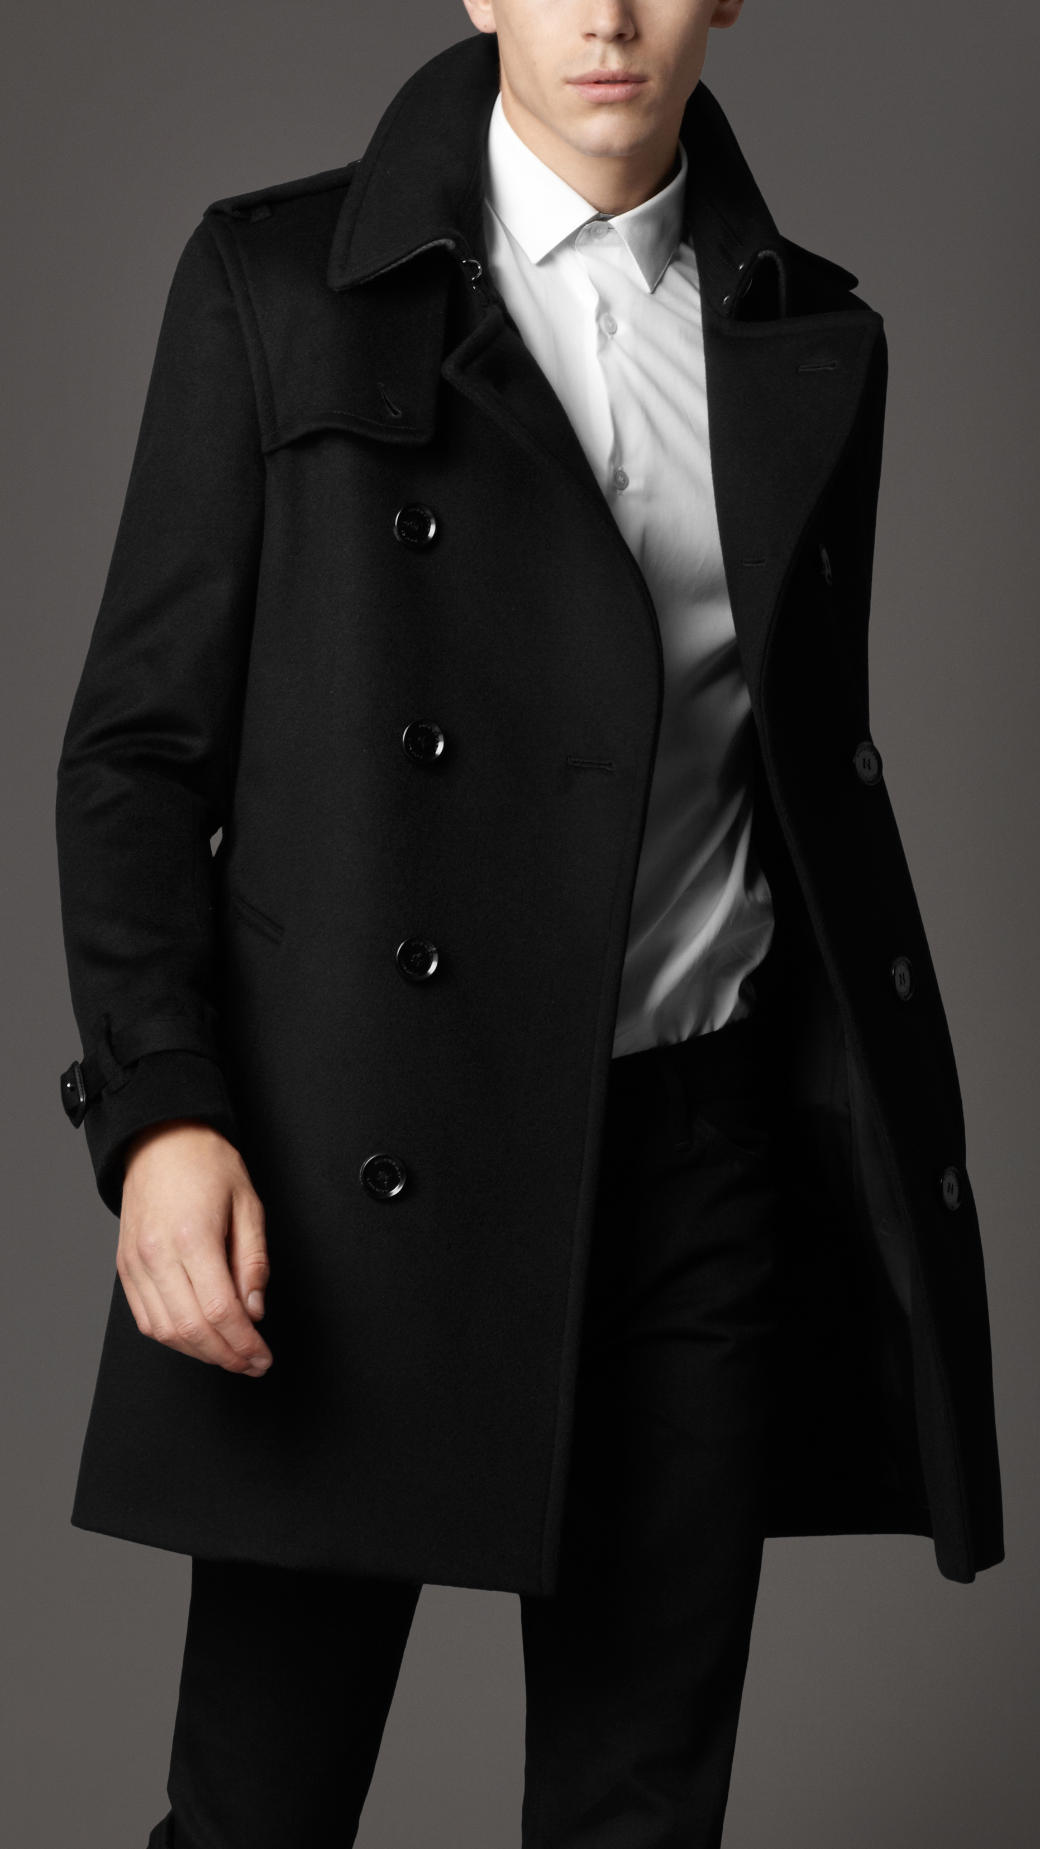 Burberry Wool Trench Coat in Black for Men - Lyst